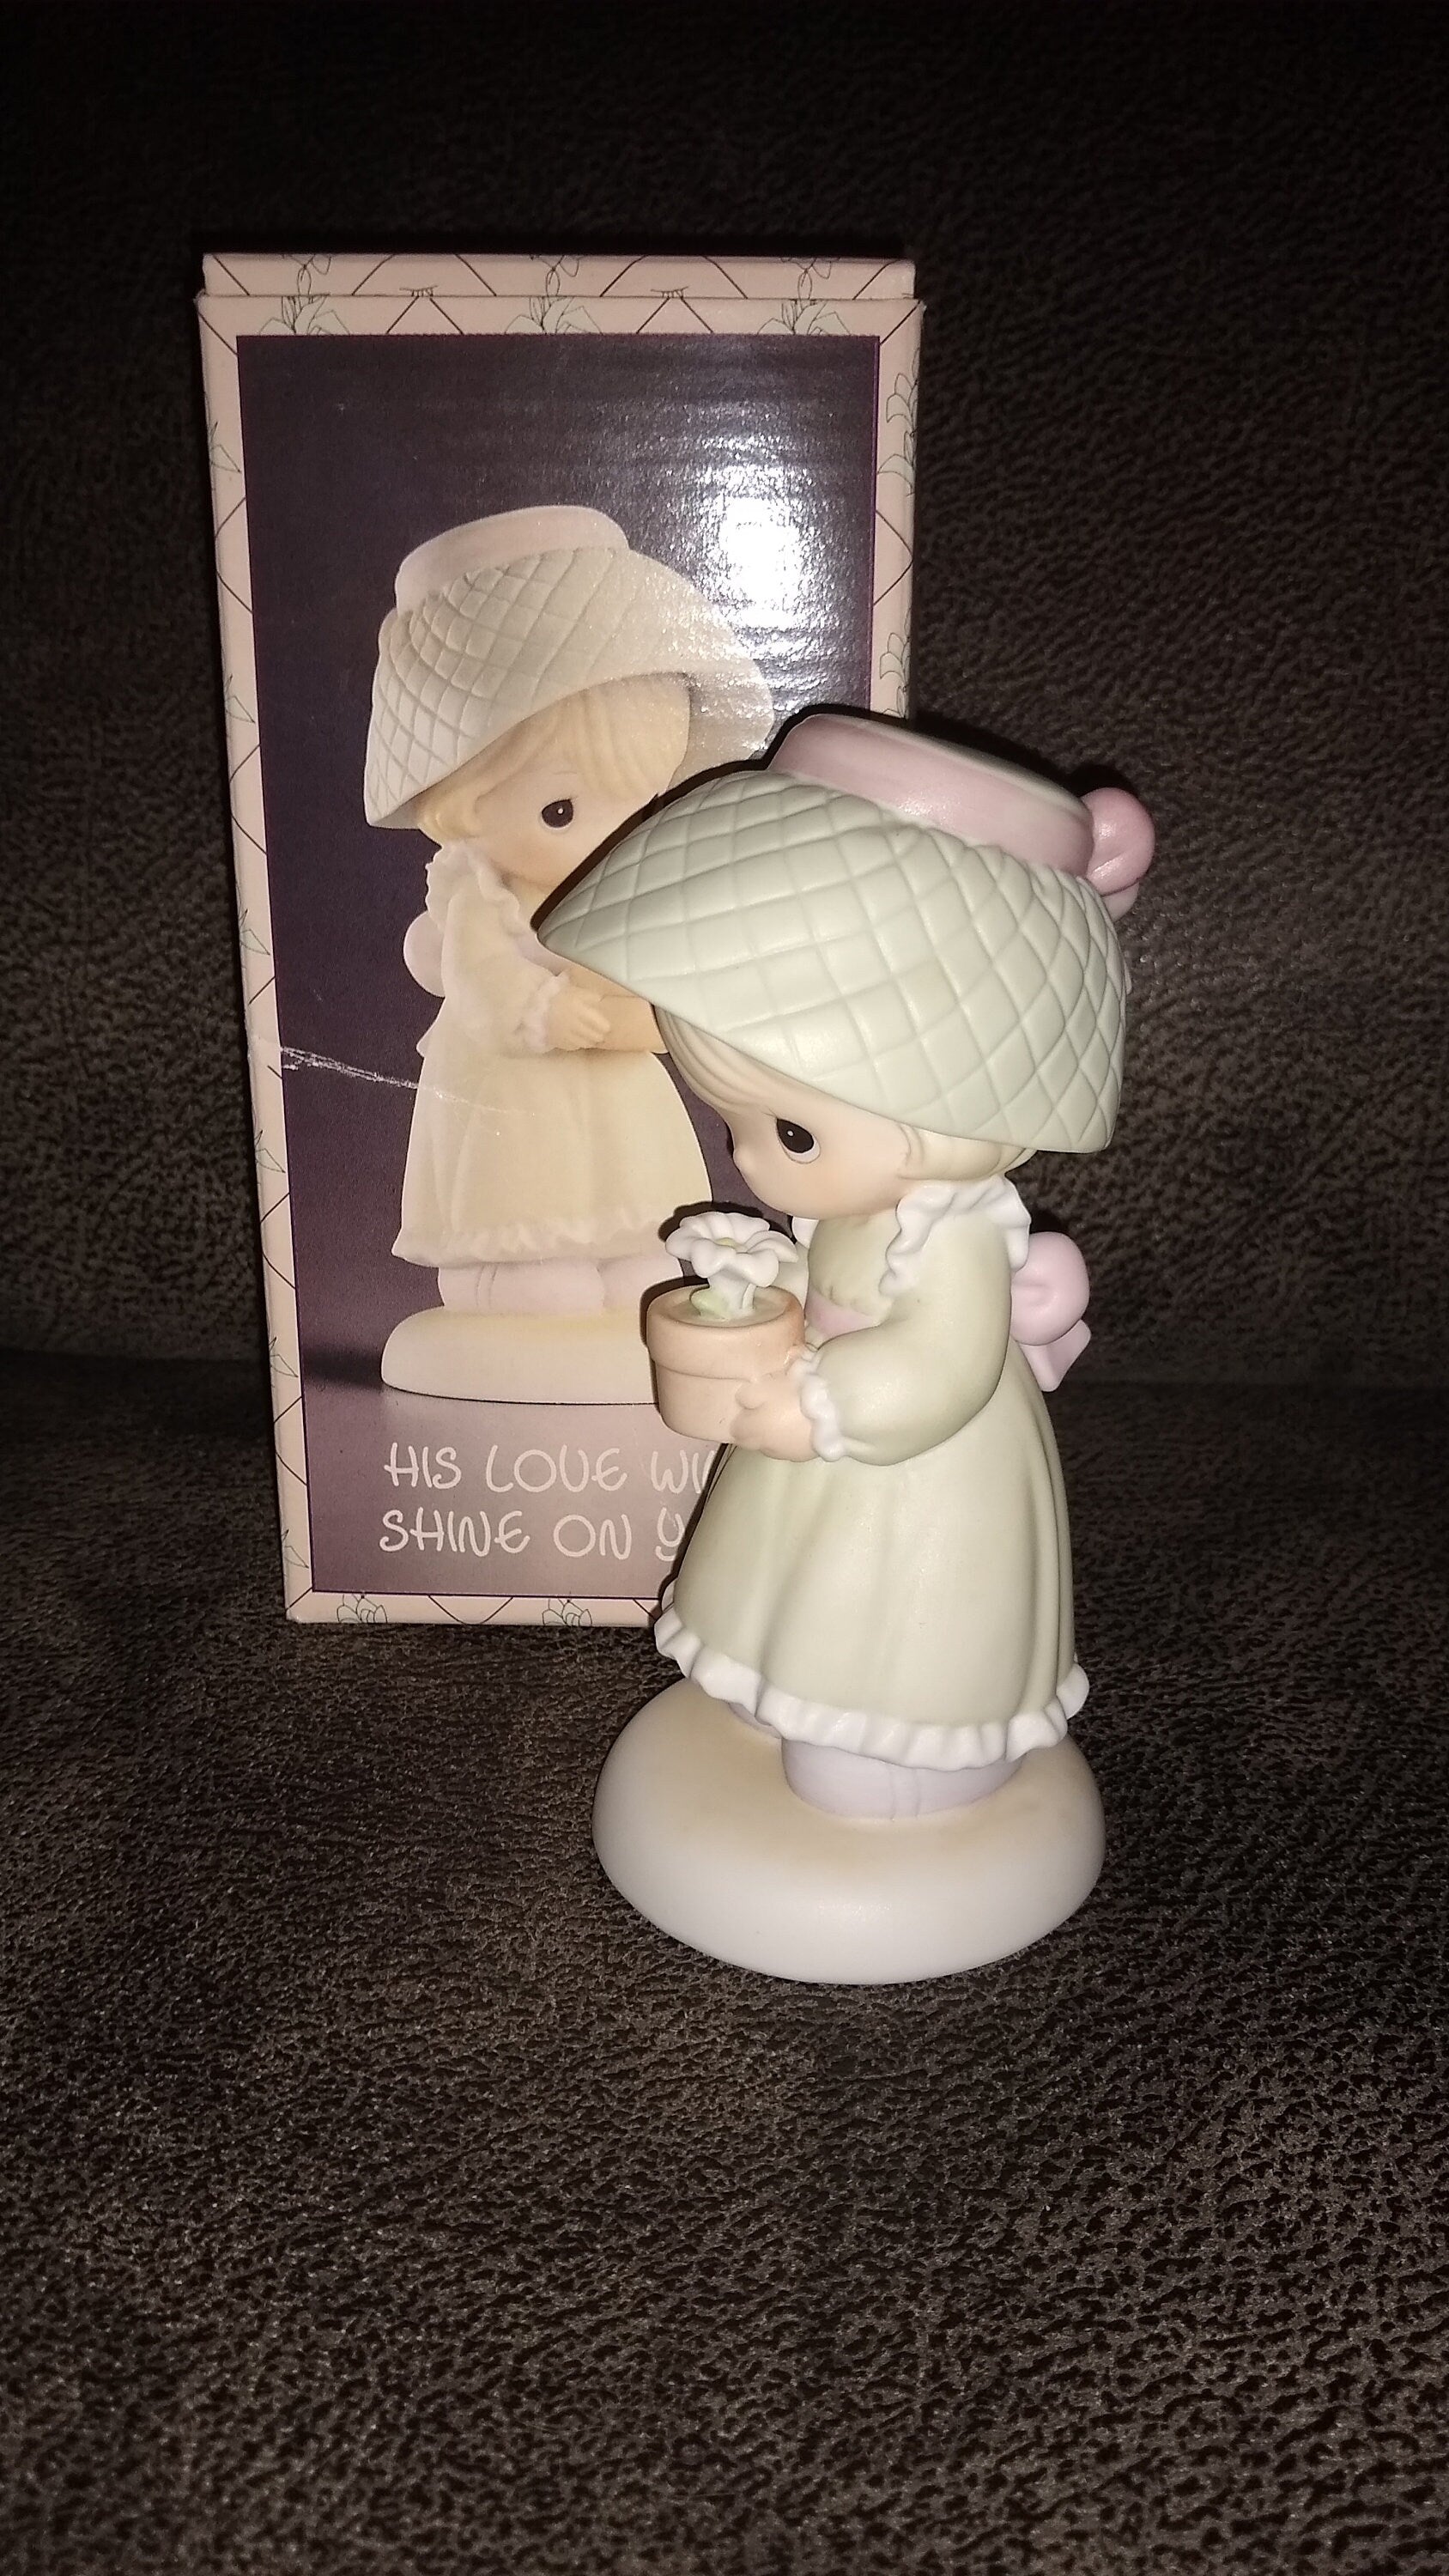 Precious Moments Figurine By Enesco.  His Love Will Shine On You Figurine Featuring A Woman Holding A Flower Pot With Flowers.